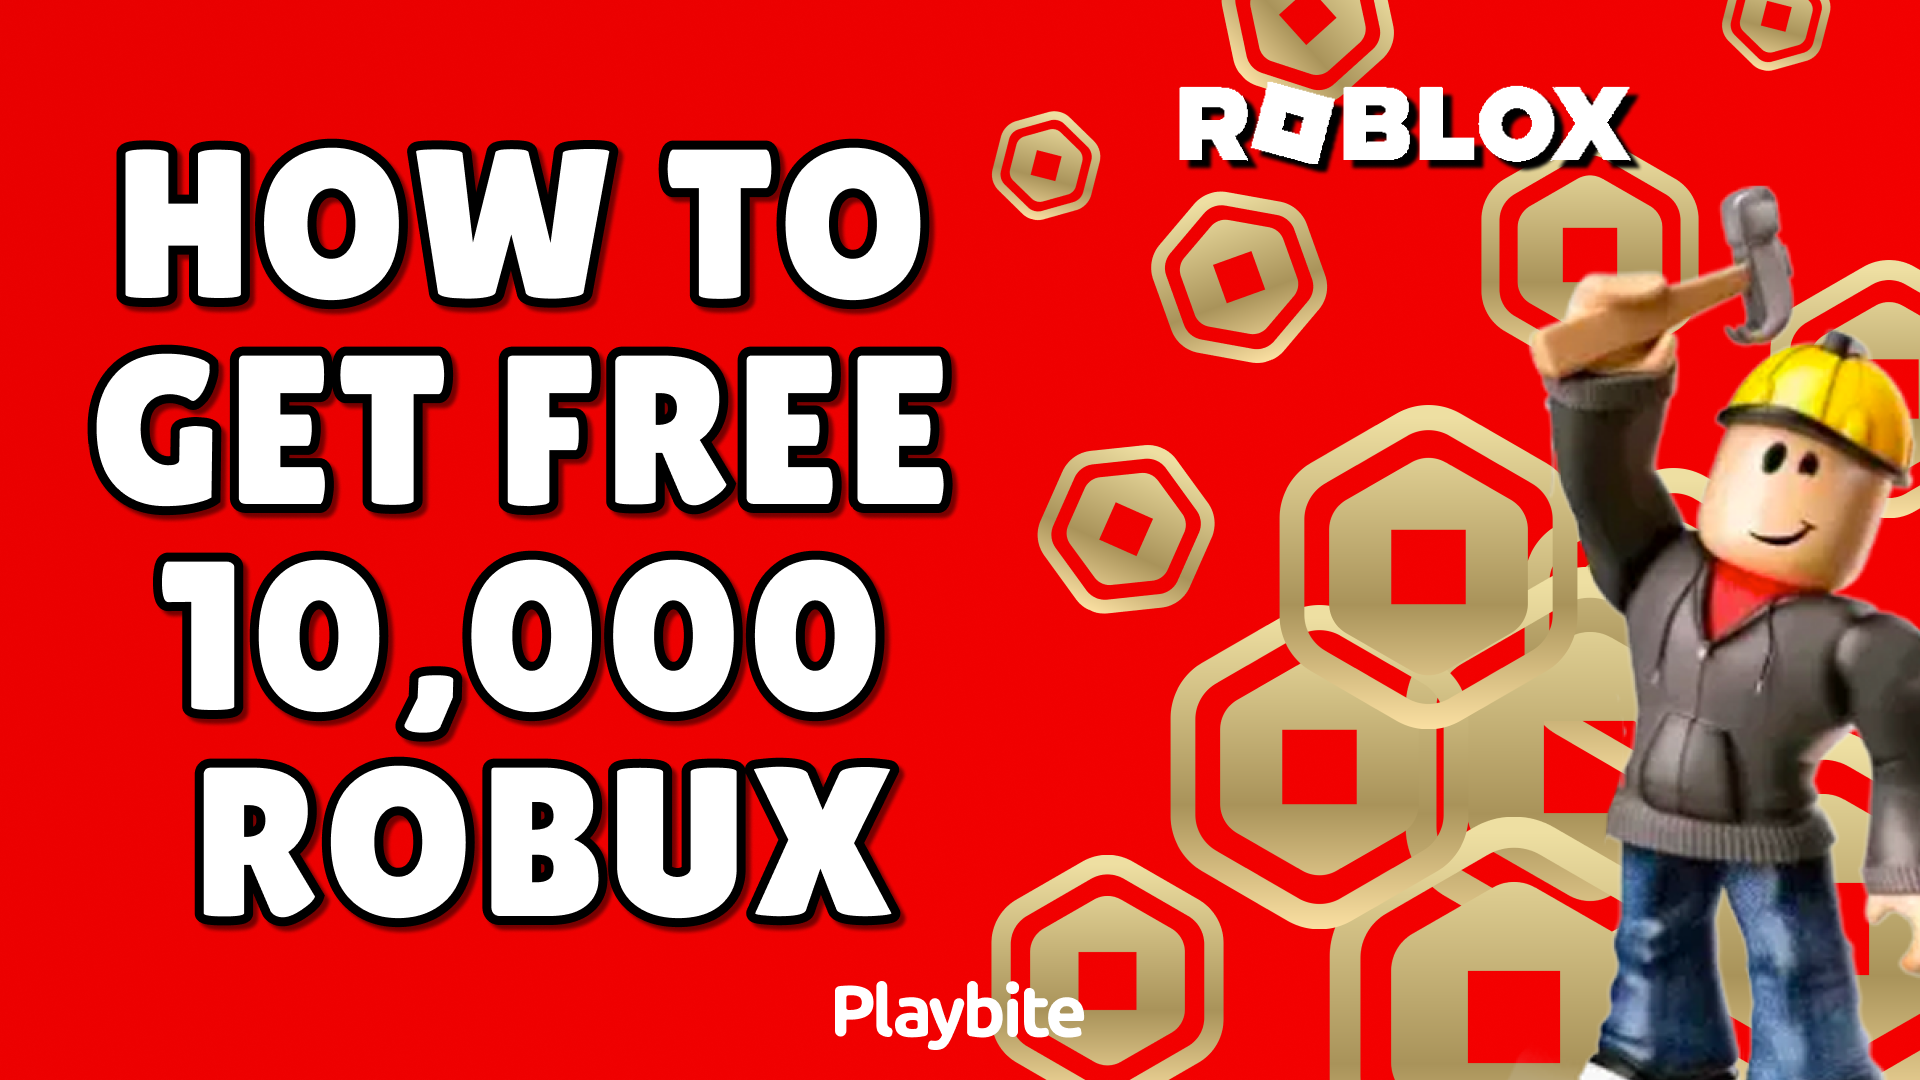 How to Get Free 10,000 Robux: Tips and Tricks